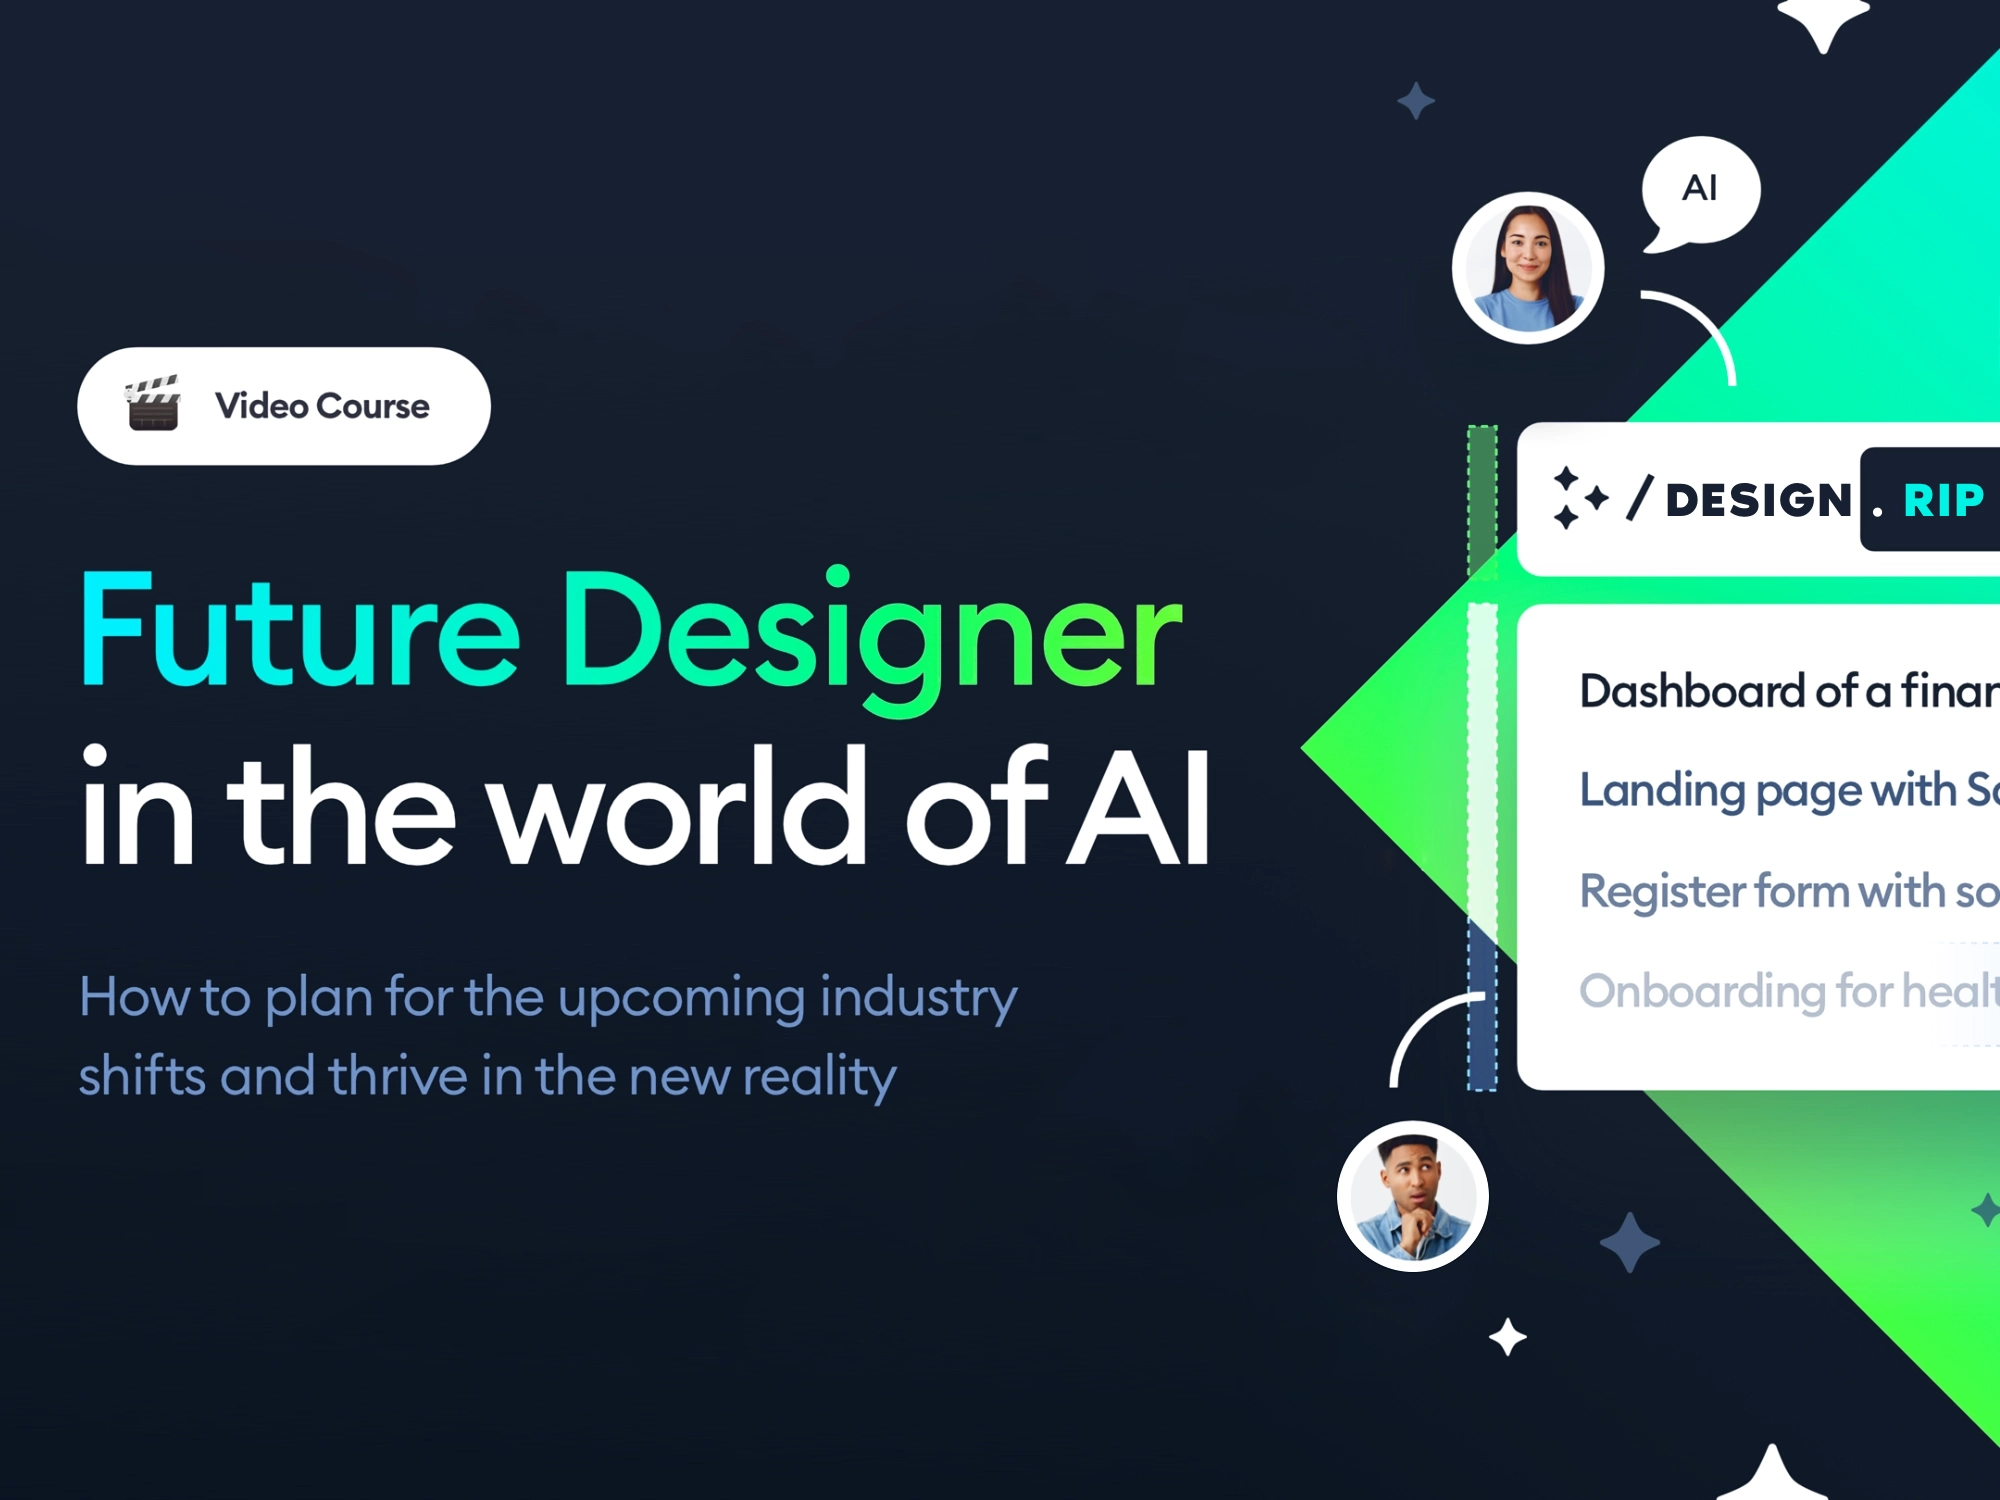 [VIP] Hype4Academy: Design + AI - Get Ready for the Future